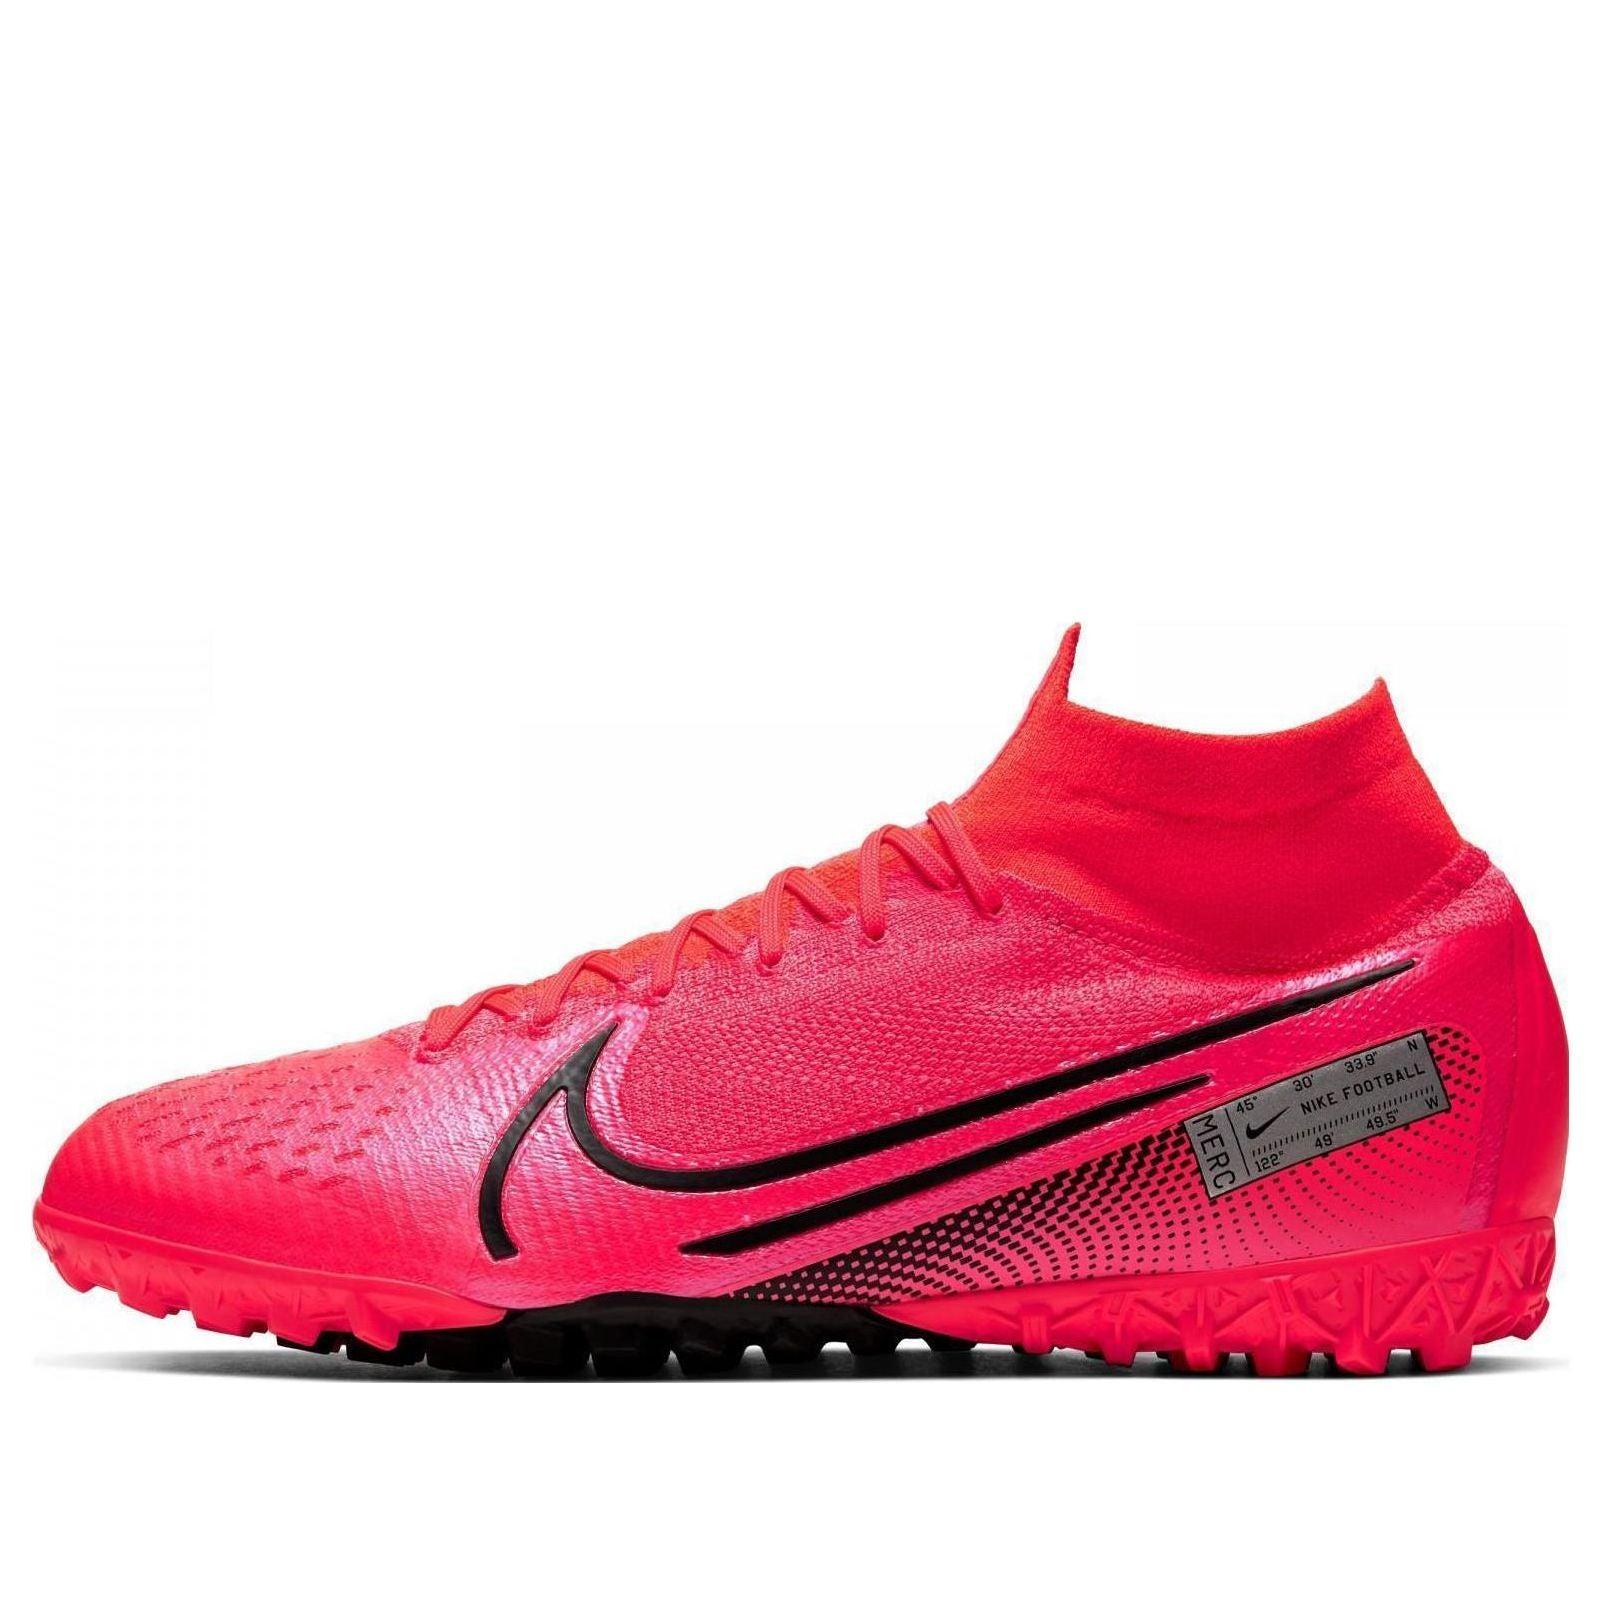 Nike Mercurial Superfly 7 Elite Tf Turf Red Black for |